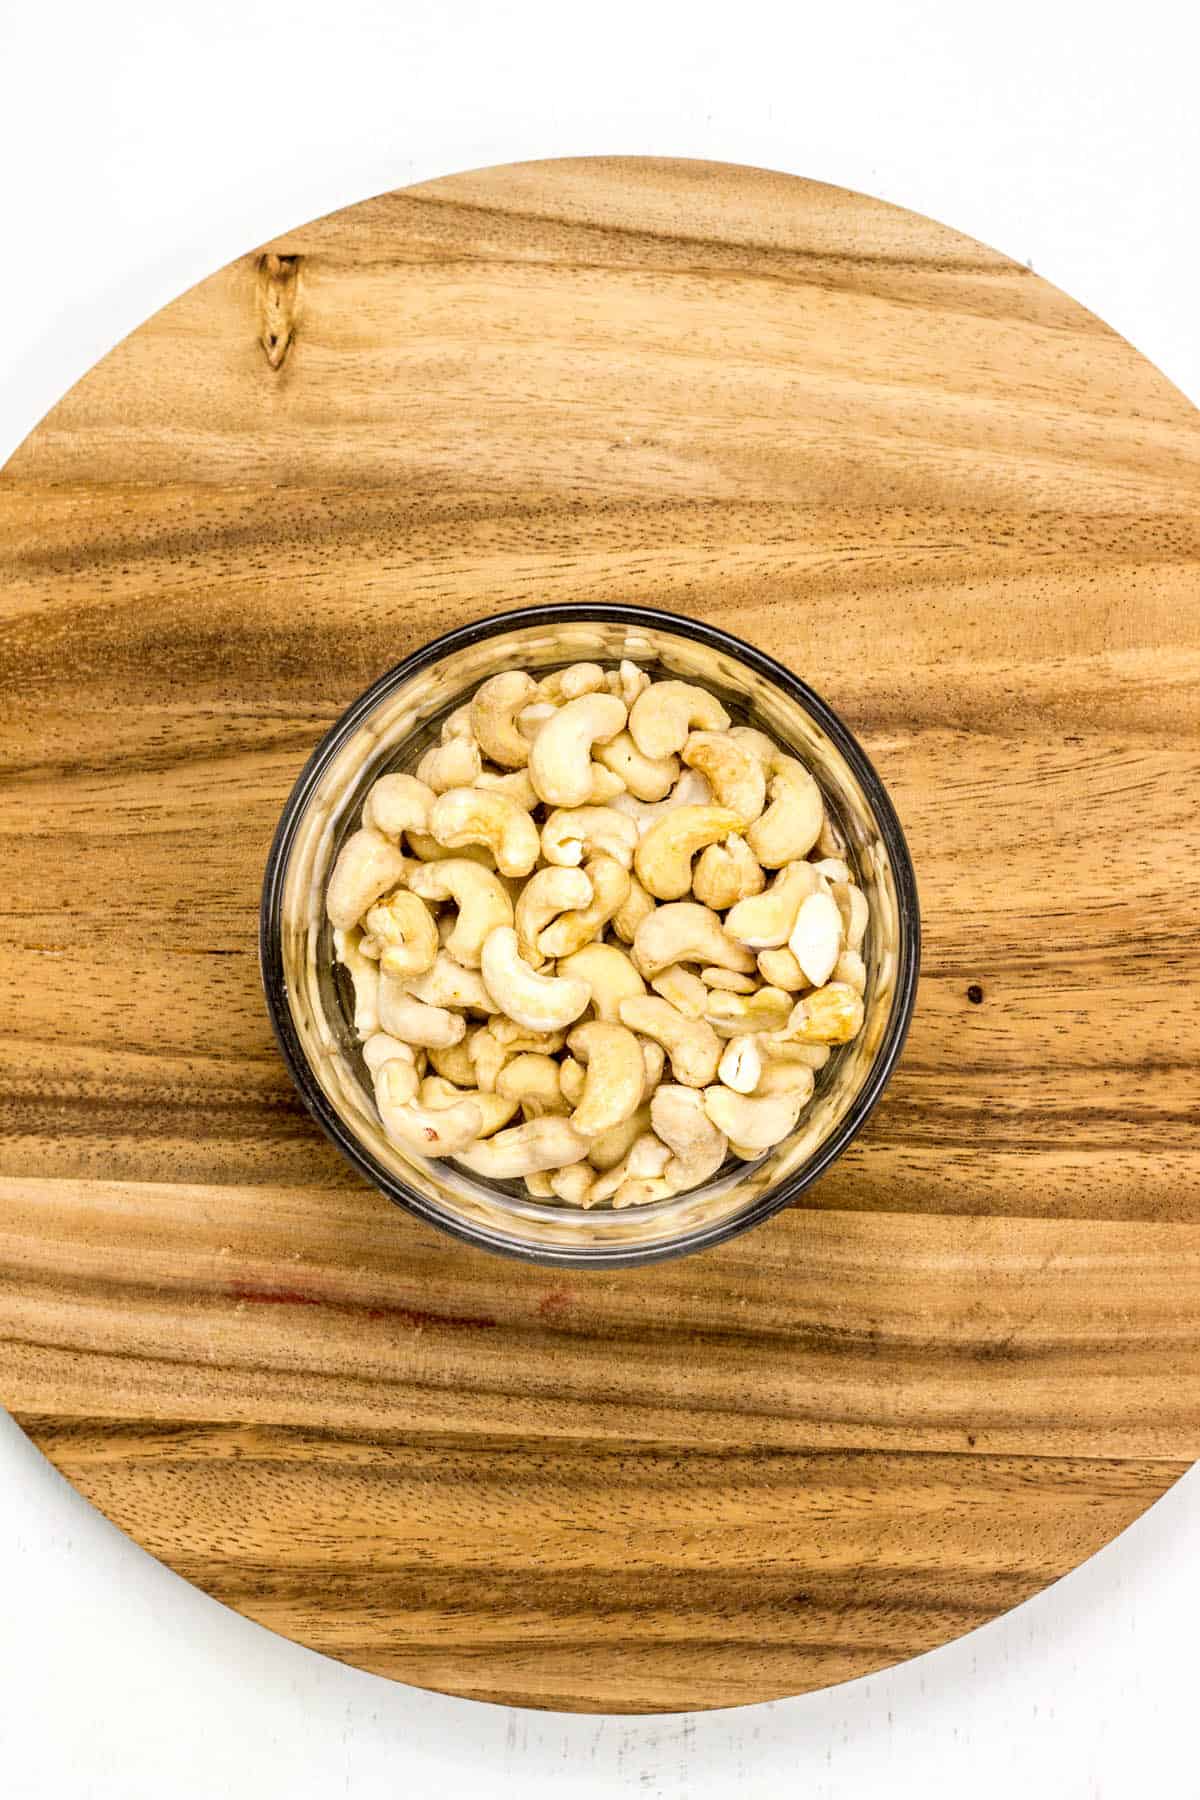 Top view of raw cashews in a small bowl on a wooden board.